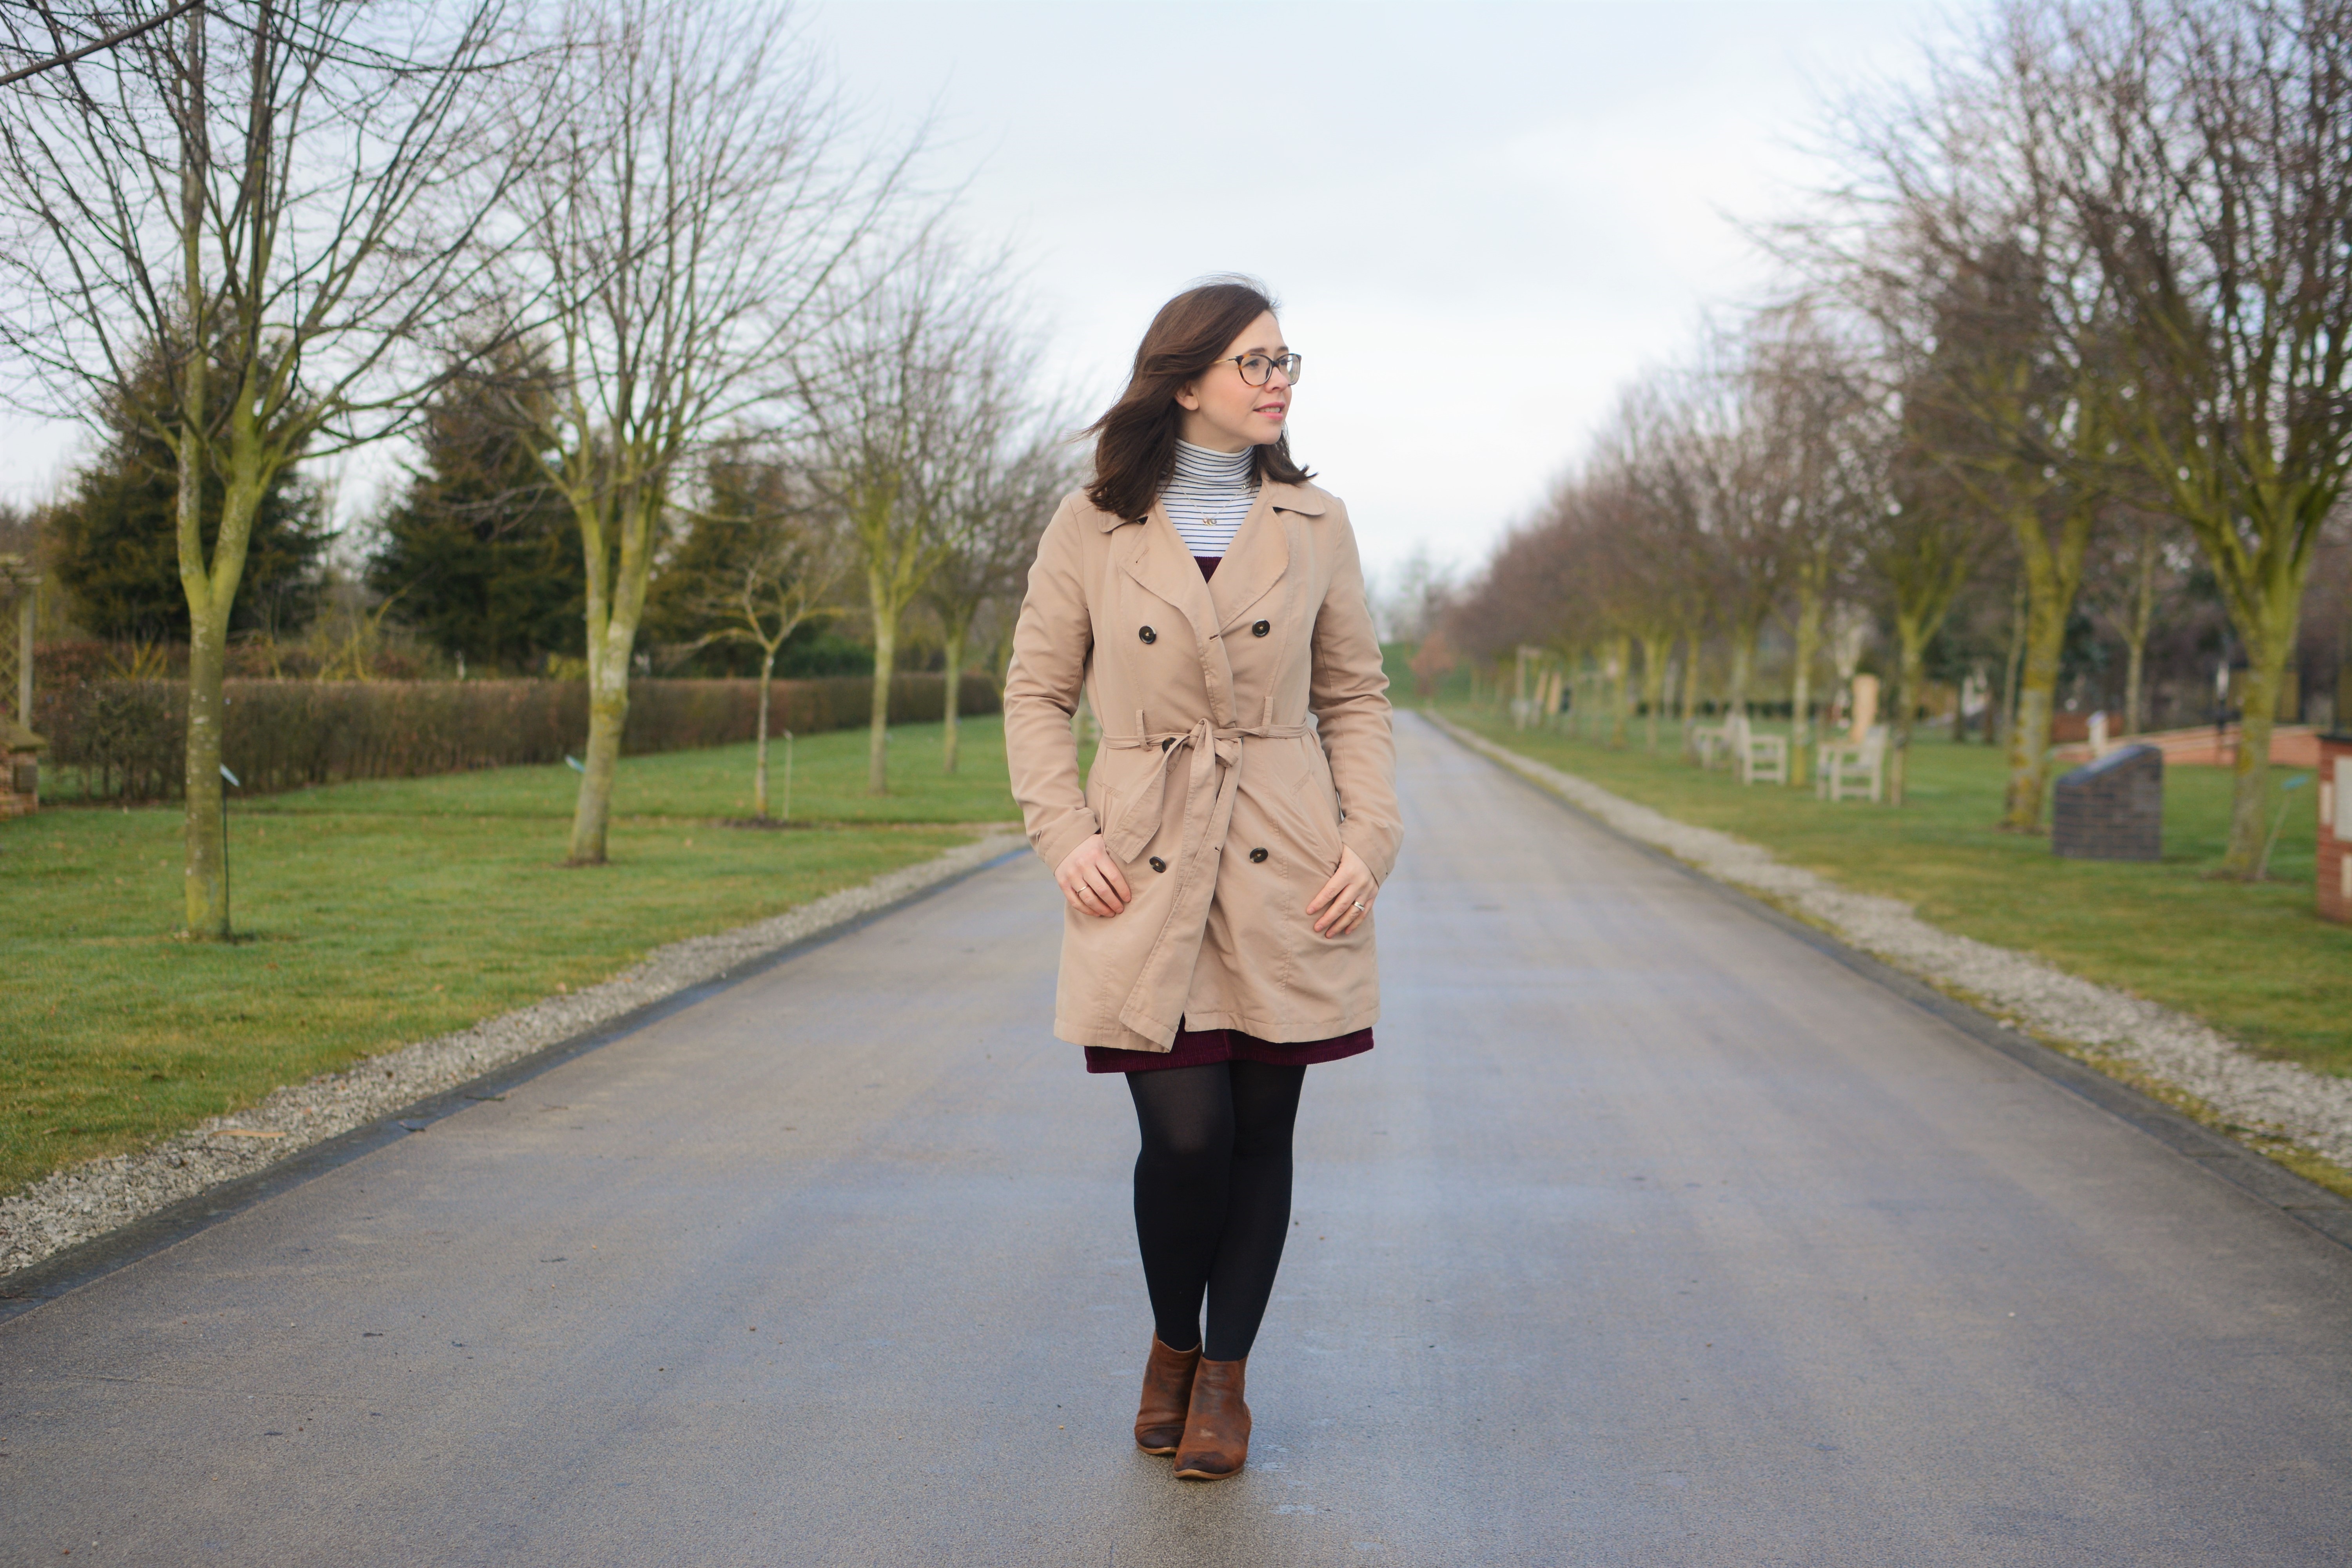 Topshop Pinafore Dress & Trench Coat - My Spring Essentials